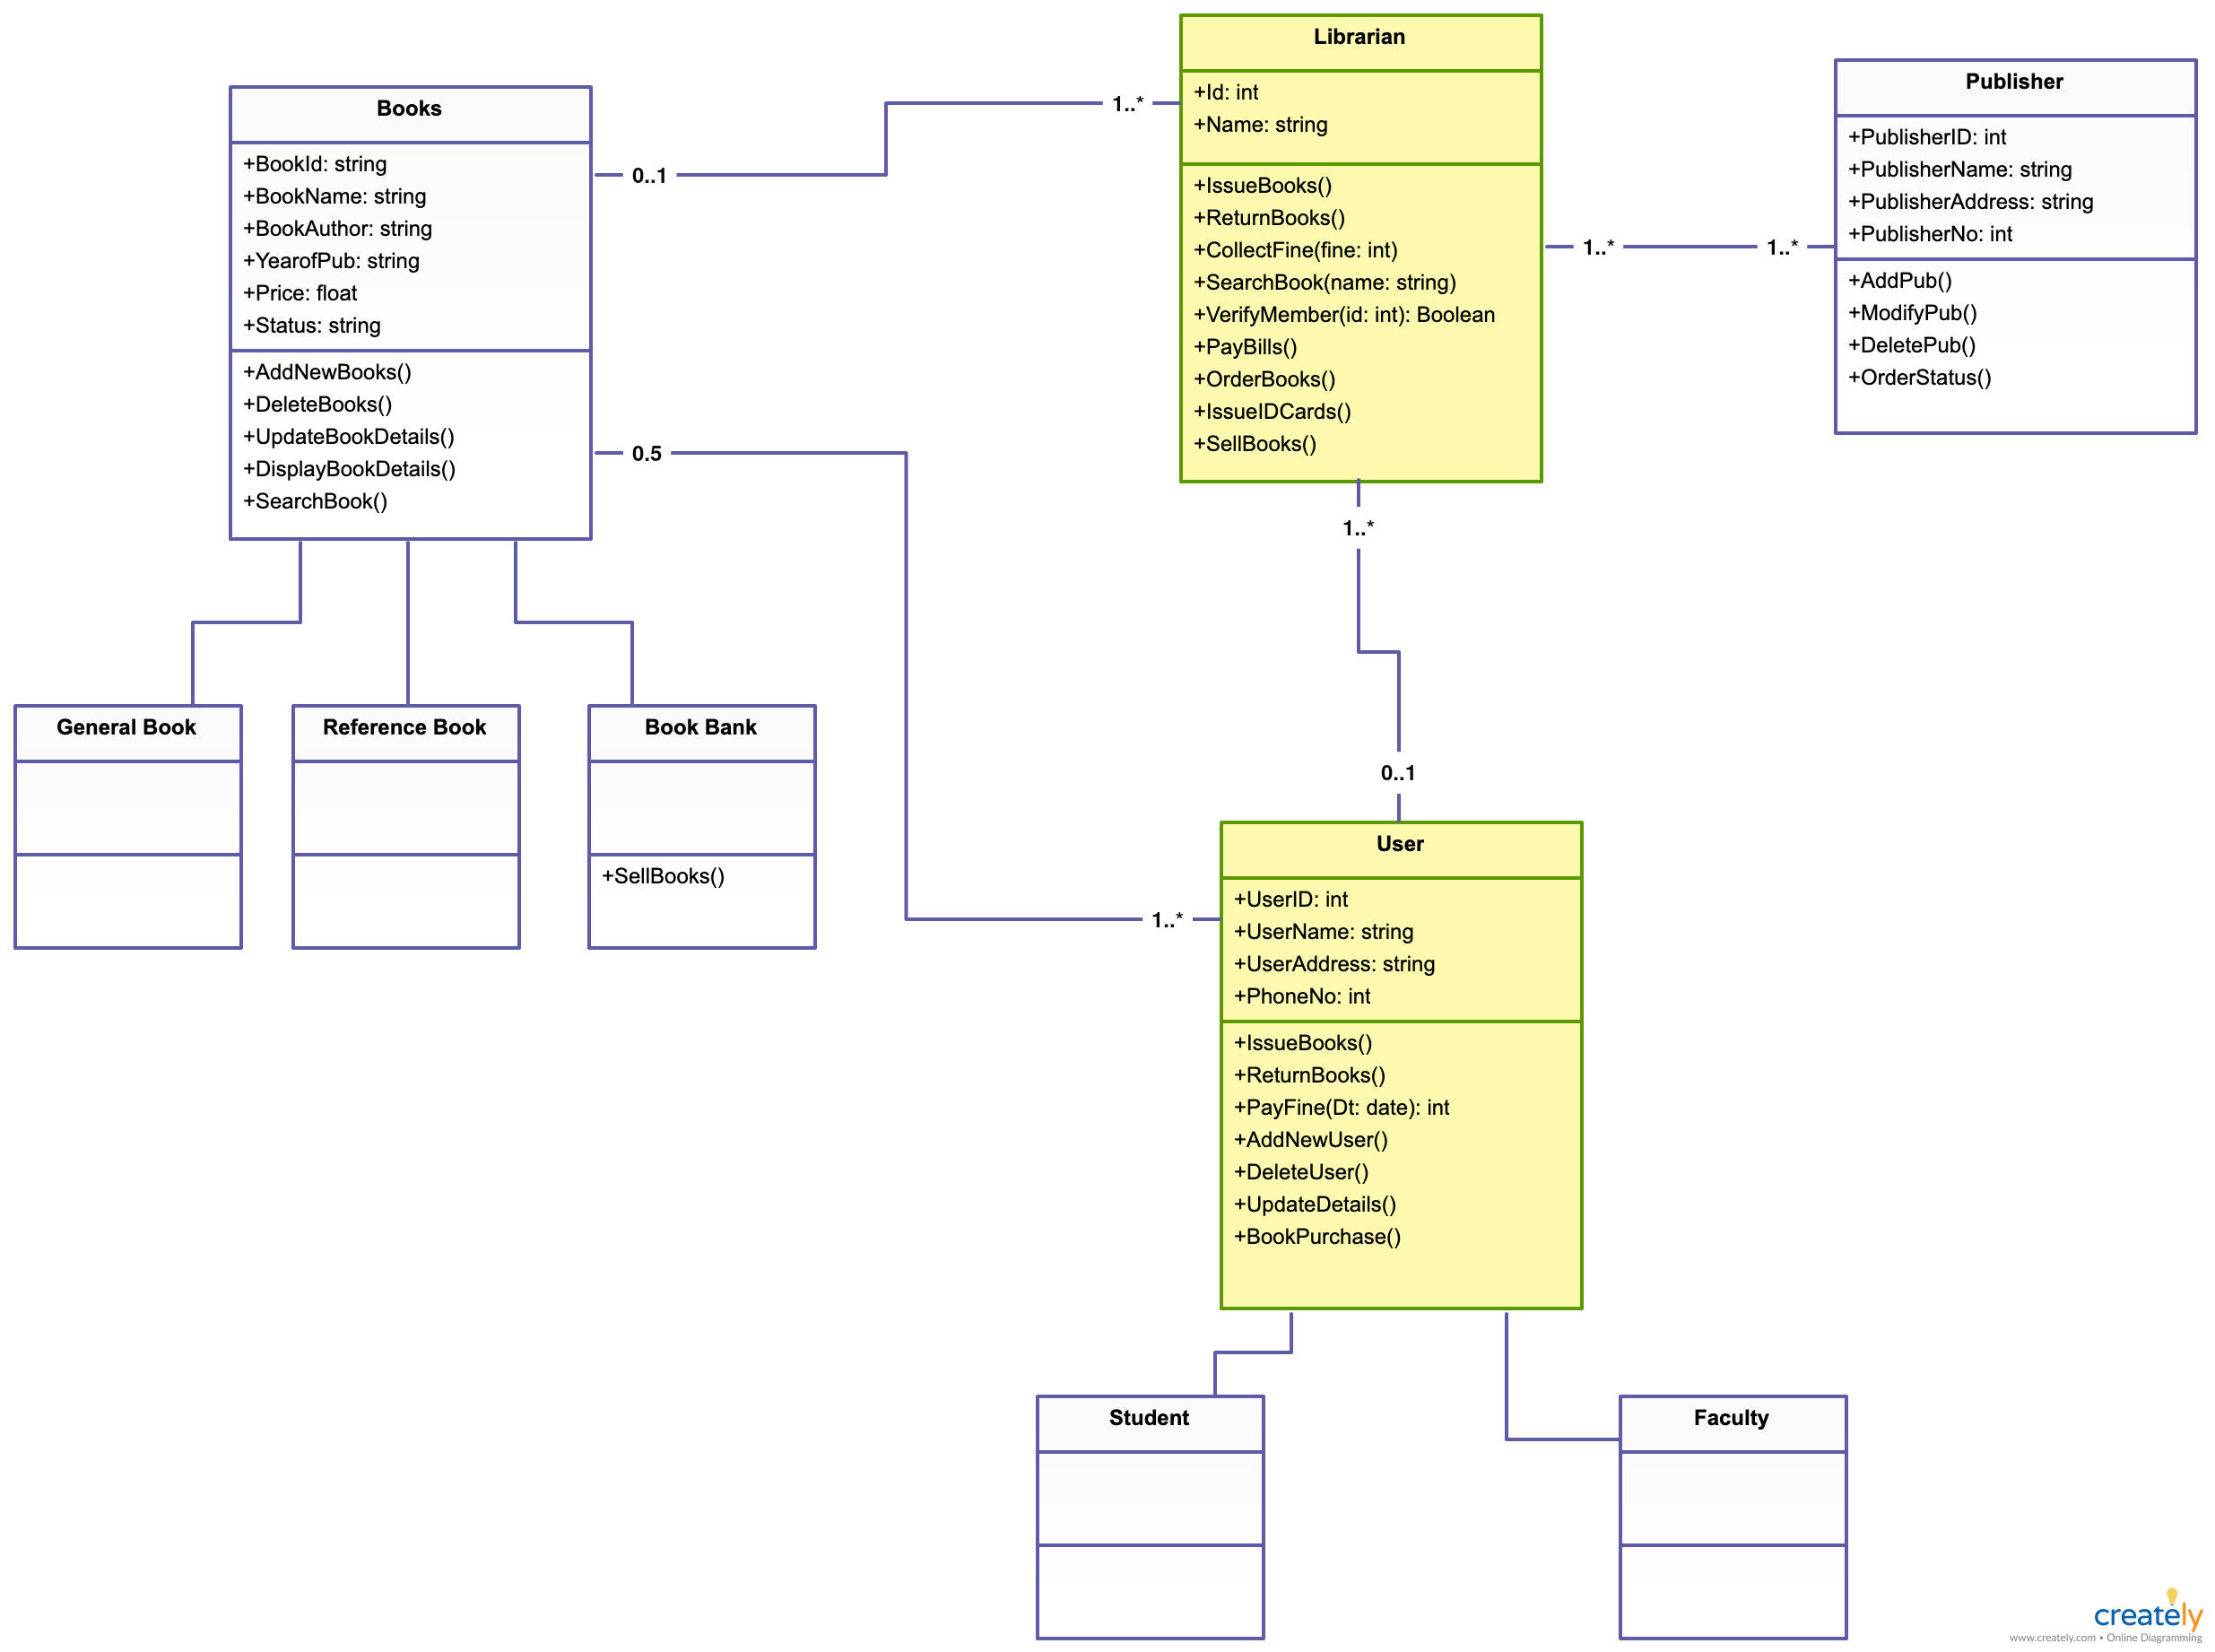 Class Diagram Example For Library Management System Diagram Media